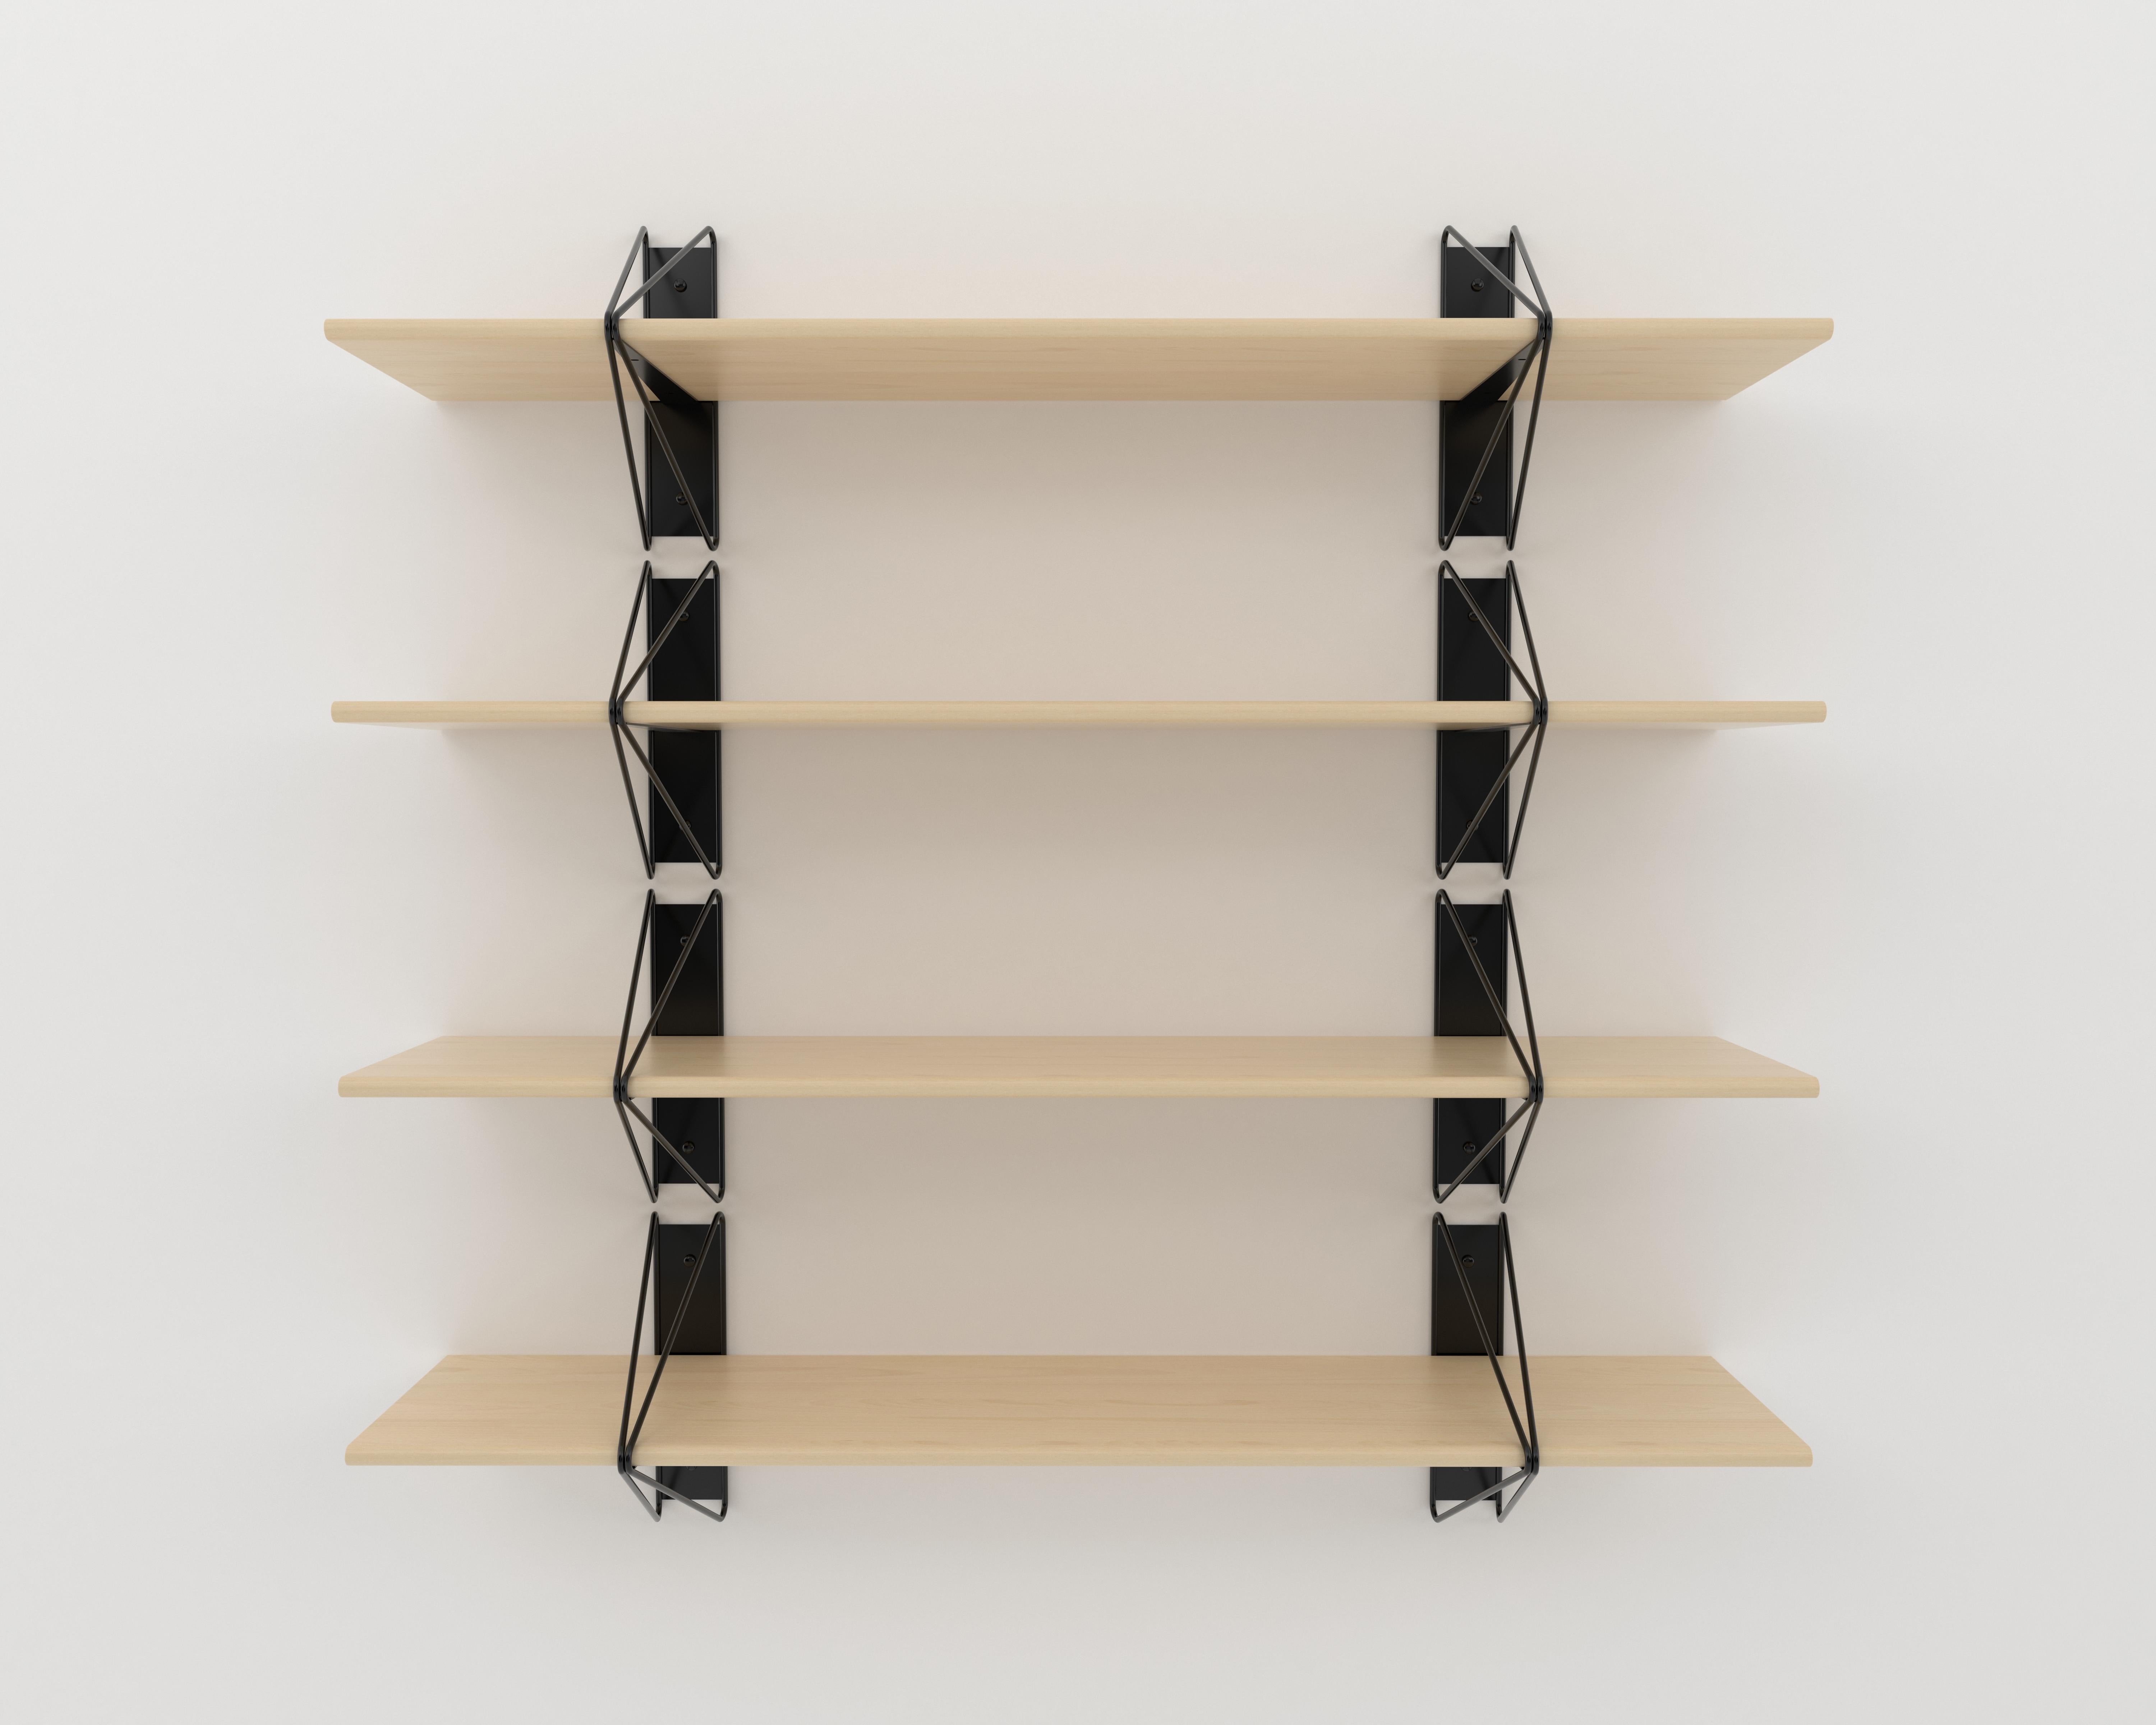 Oiled Set of 2 Strut Shelves from Souda, Black and Maple, Made to Order For Sale